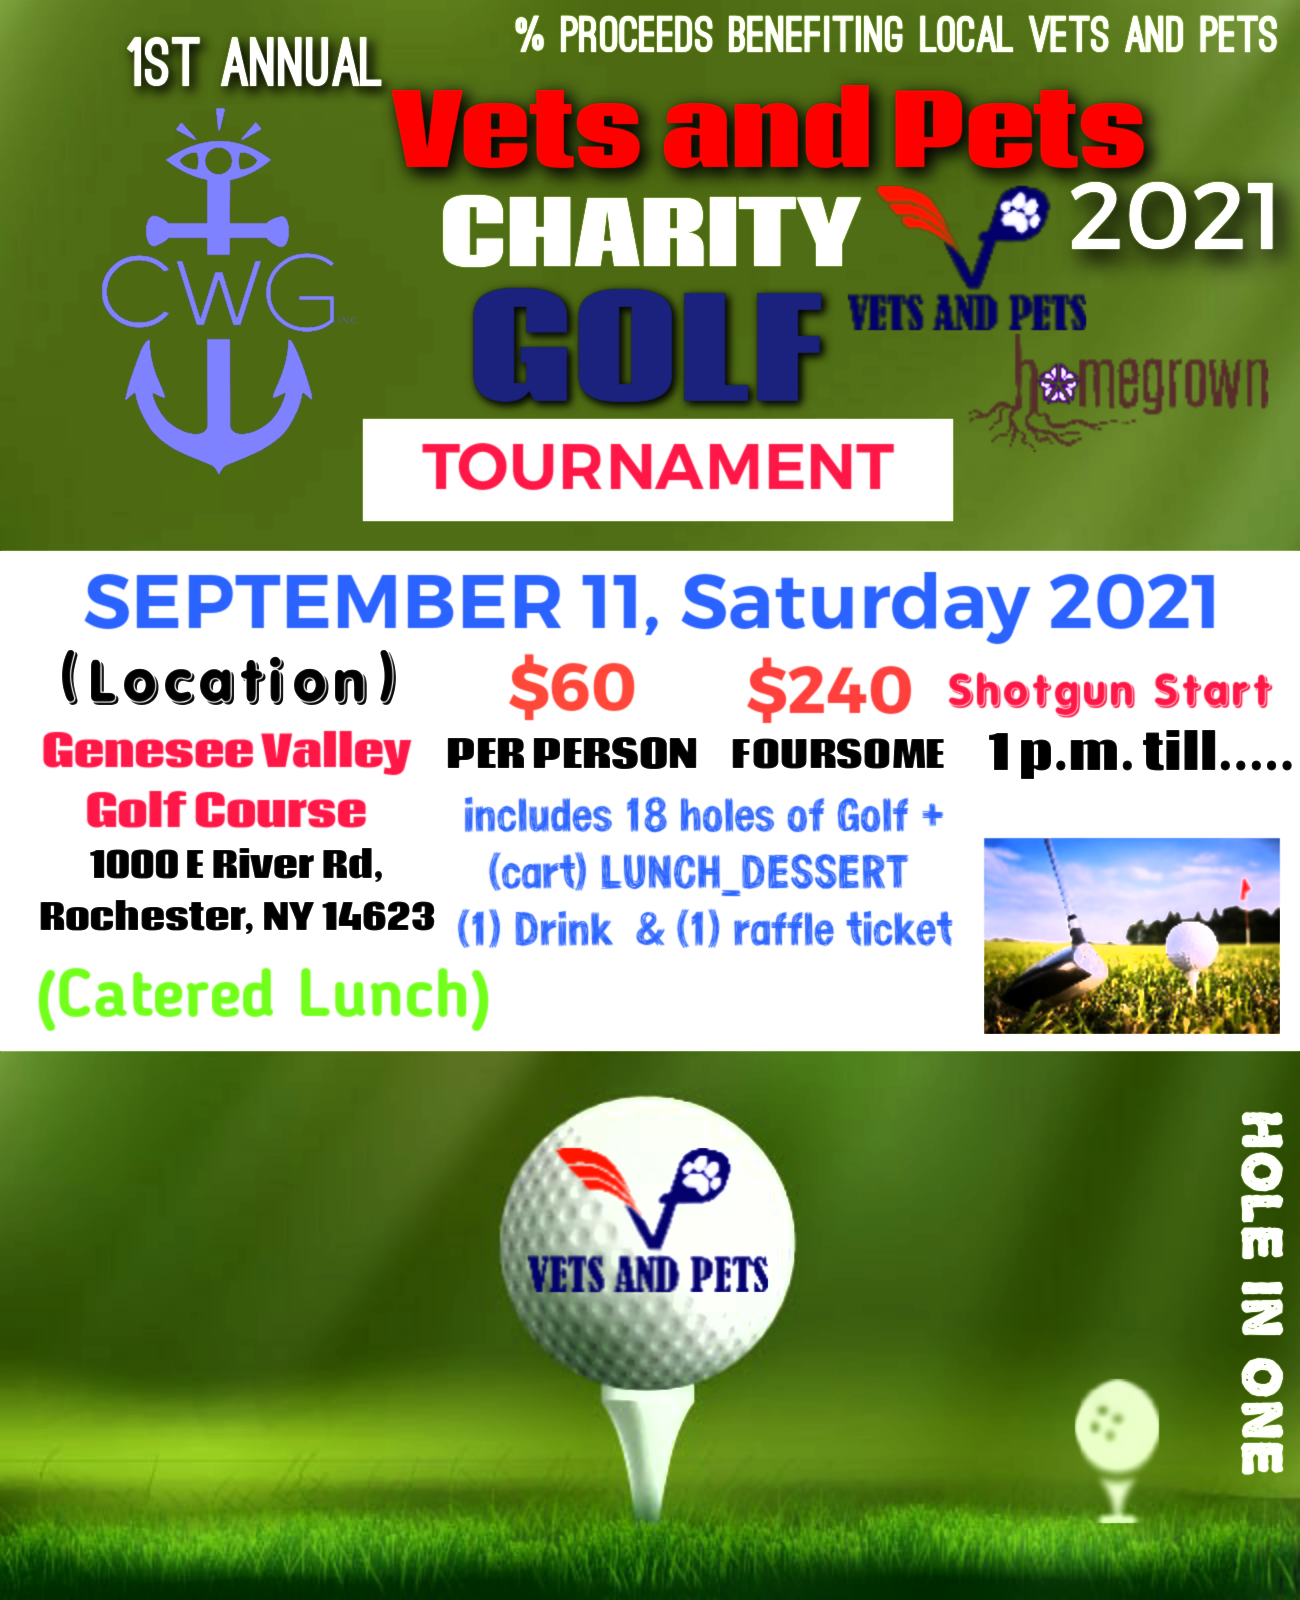 Vets & Pets 1st Annual Charity Golf Tournament